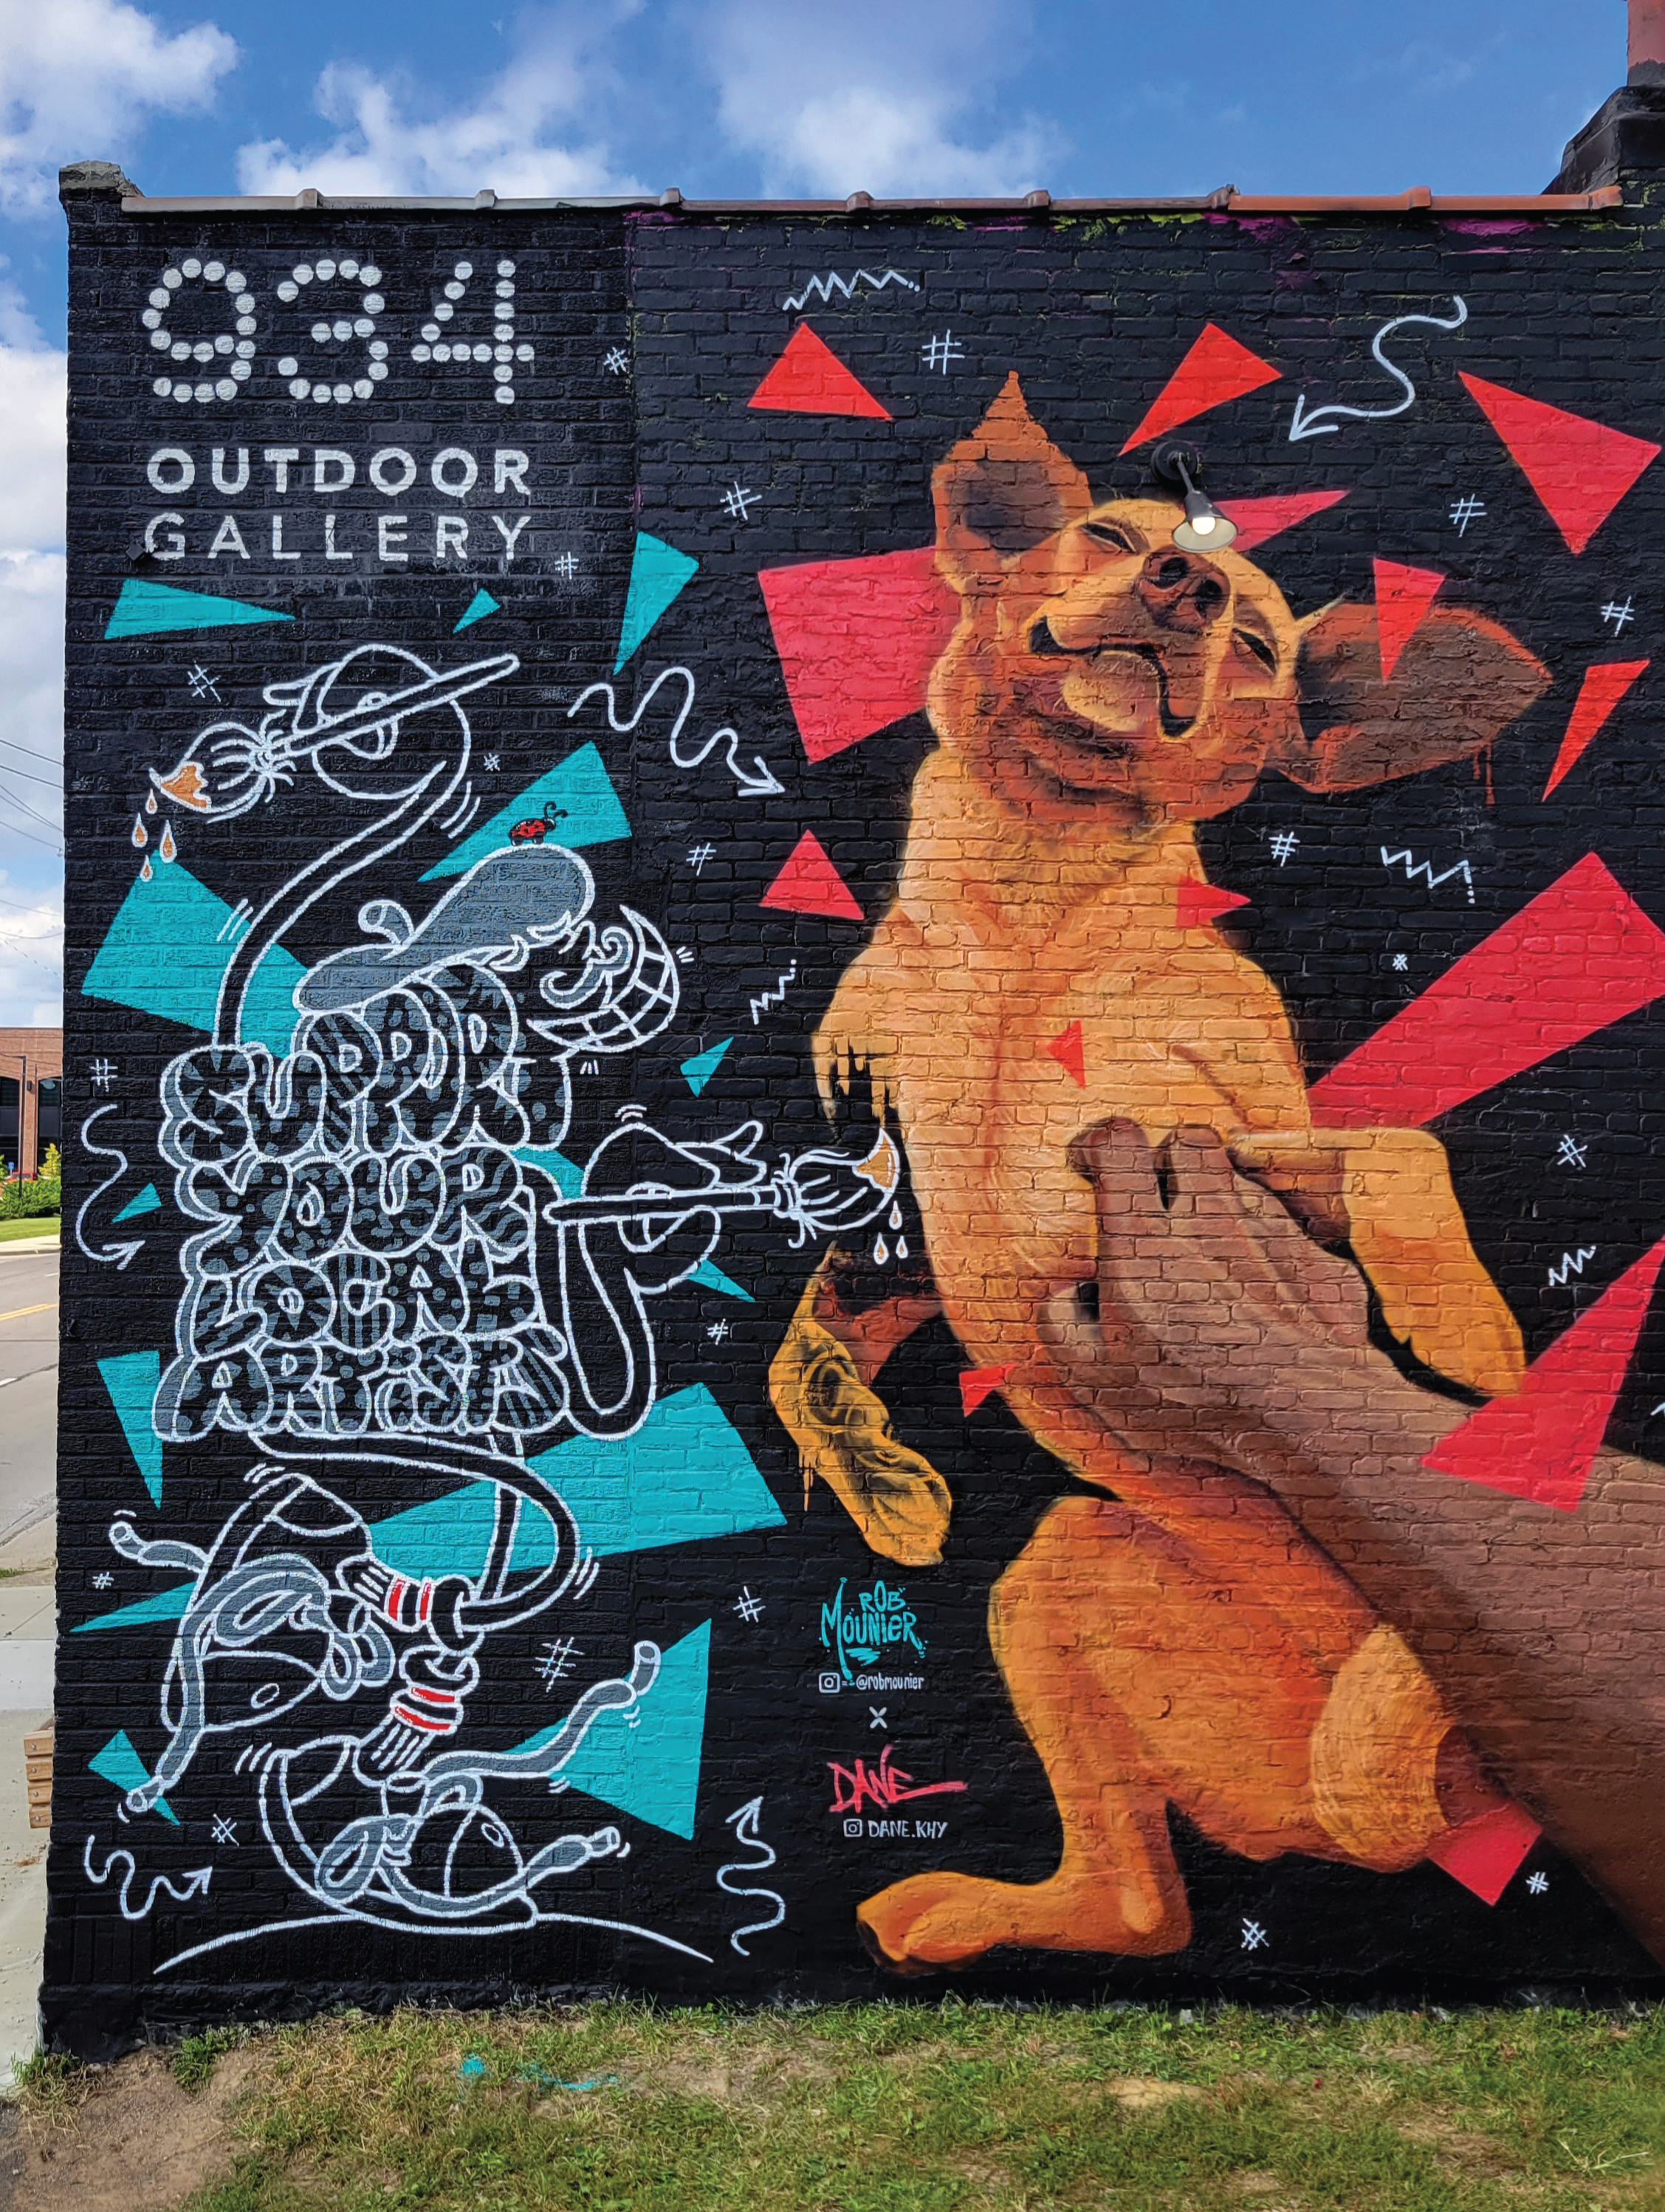 934 Gallery Mural by Dane Khy and Rob Mounier